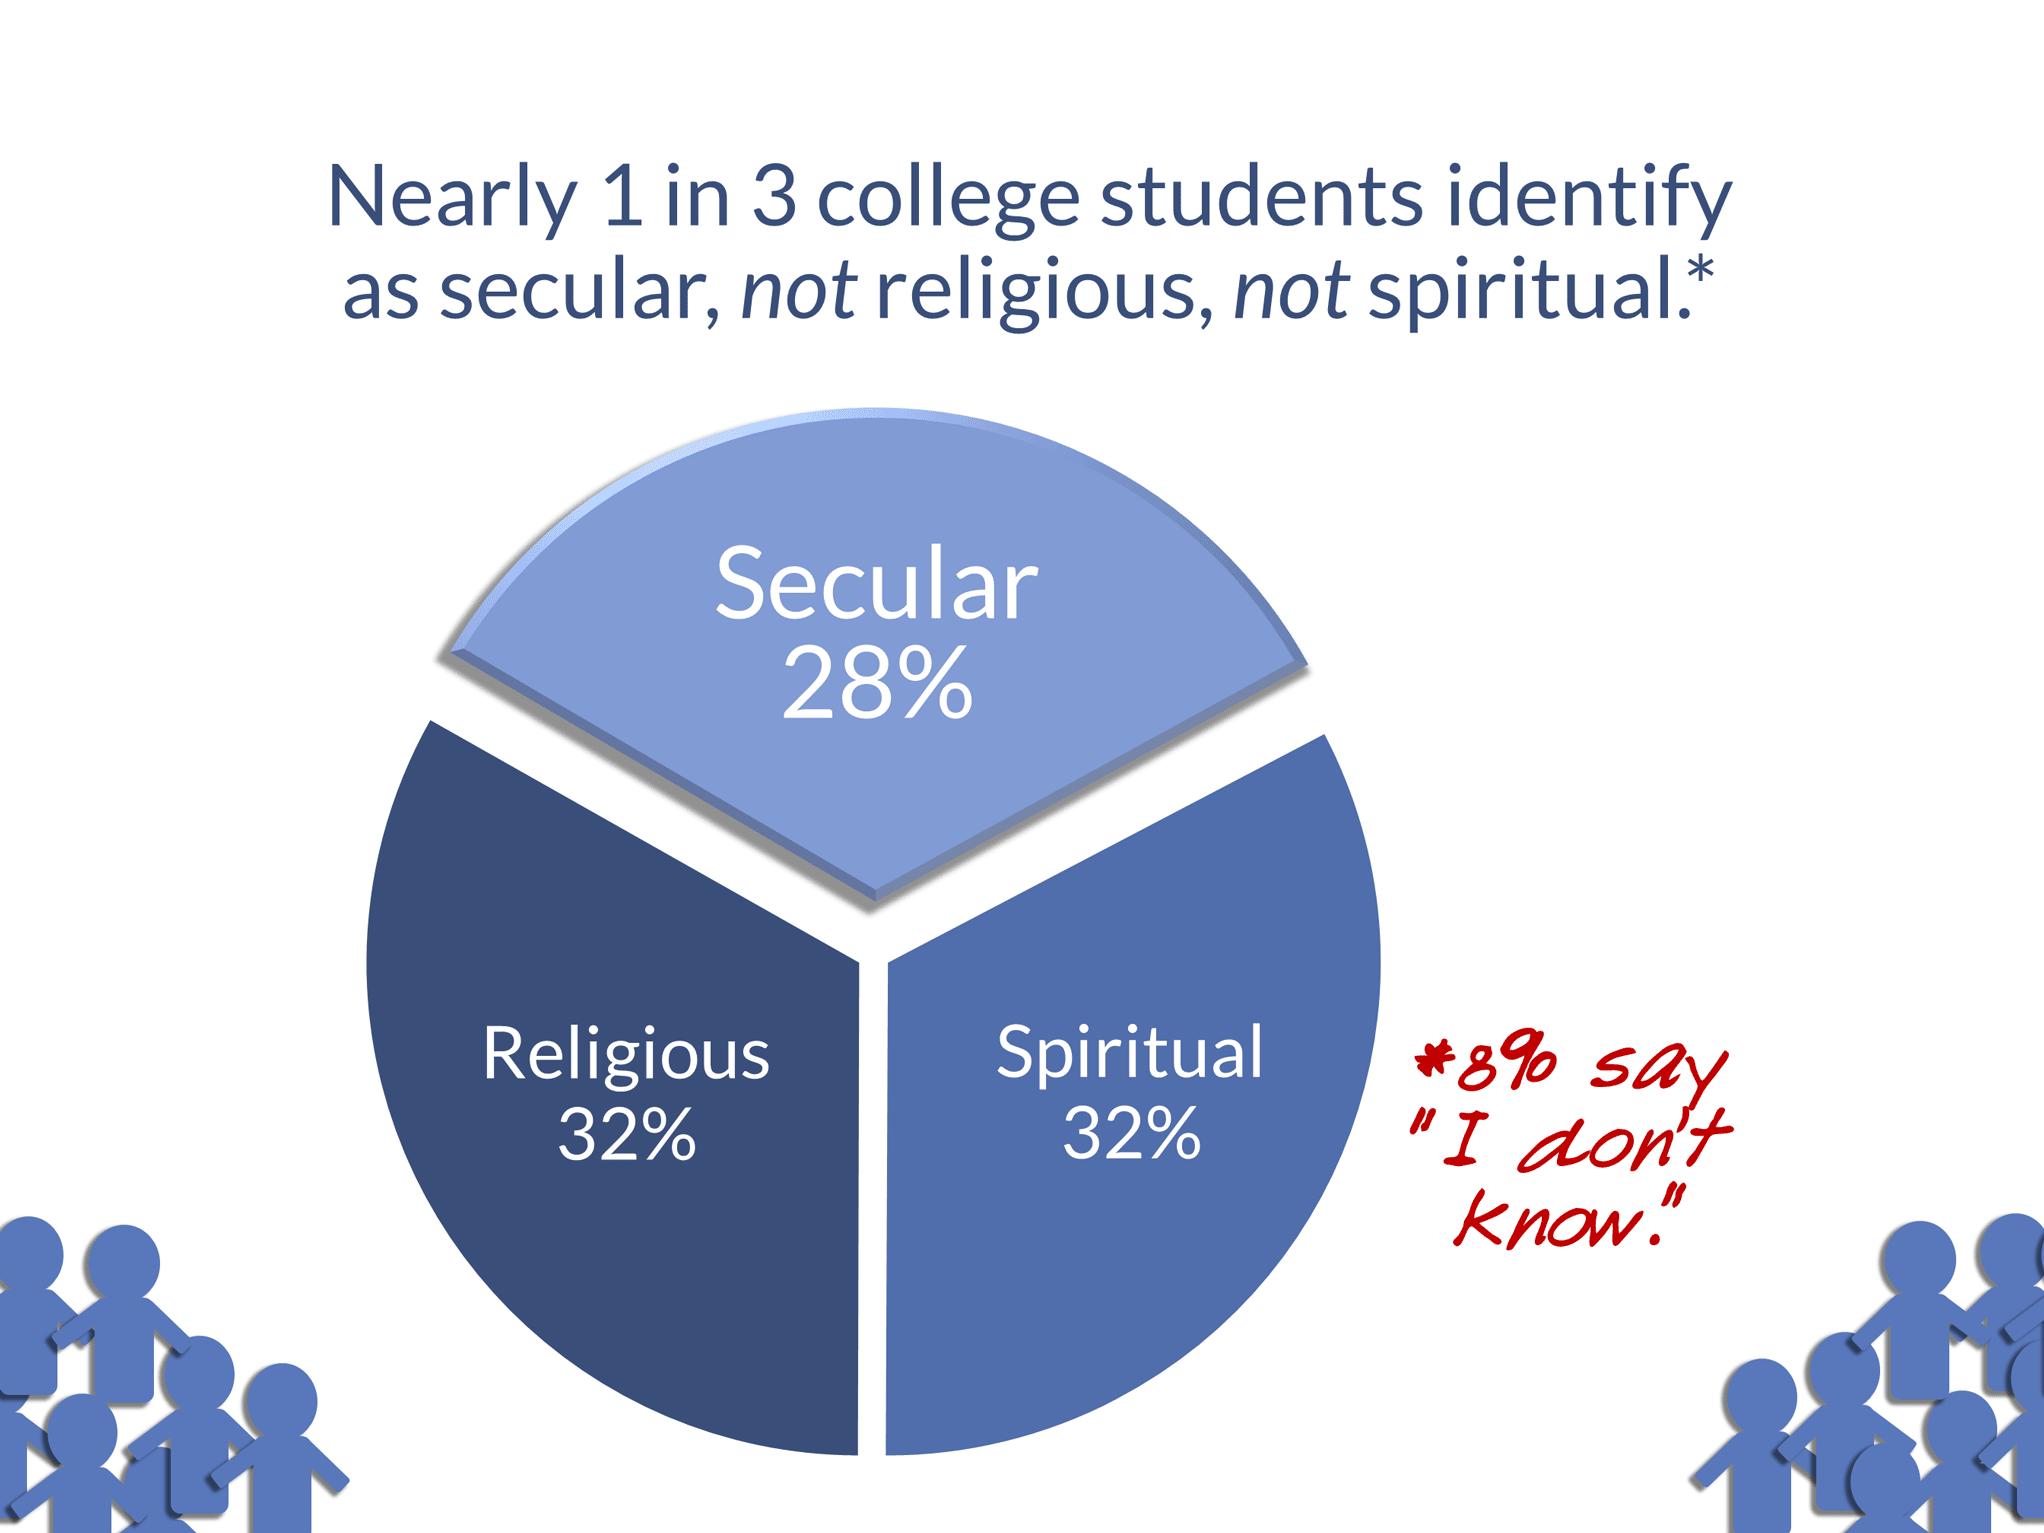 Nearly 1 in 3 college students identify as secular, not religious, not spiritual. Secular 28%, religious 32%, spiritual 32%. (8% say 'I don't know.')